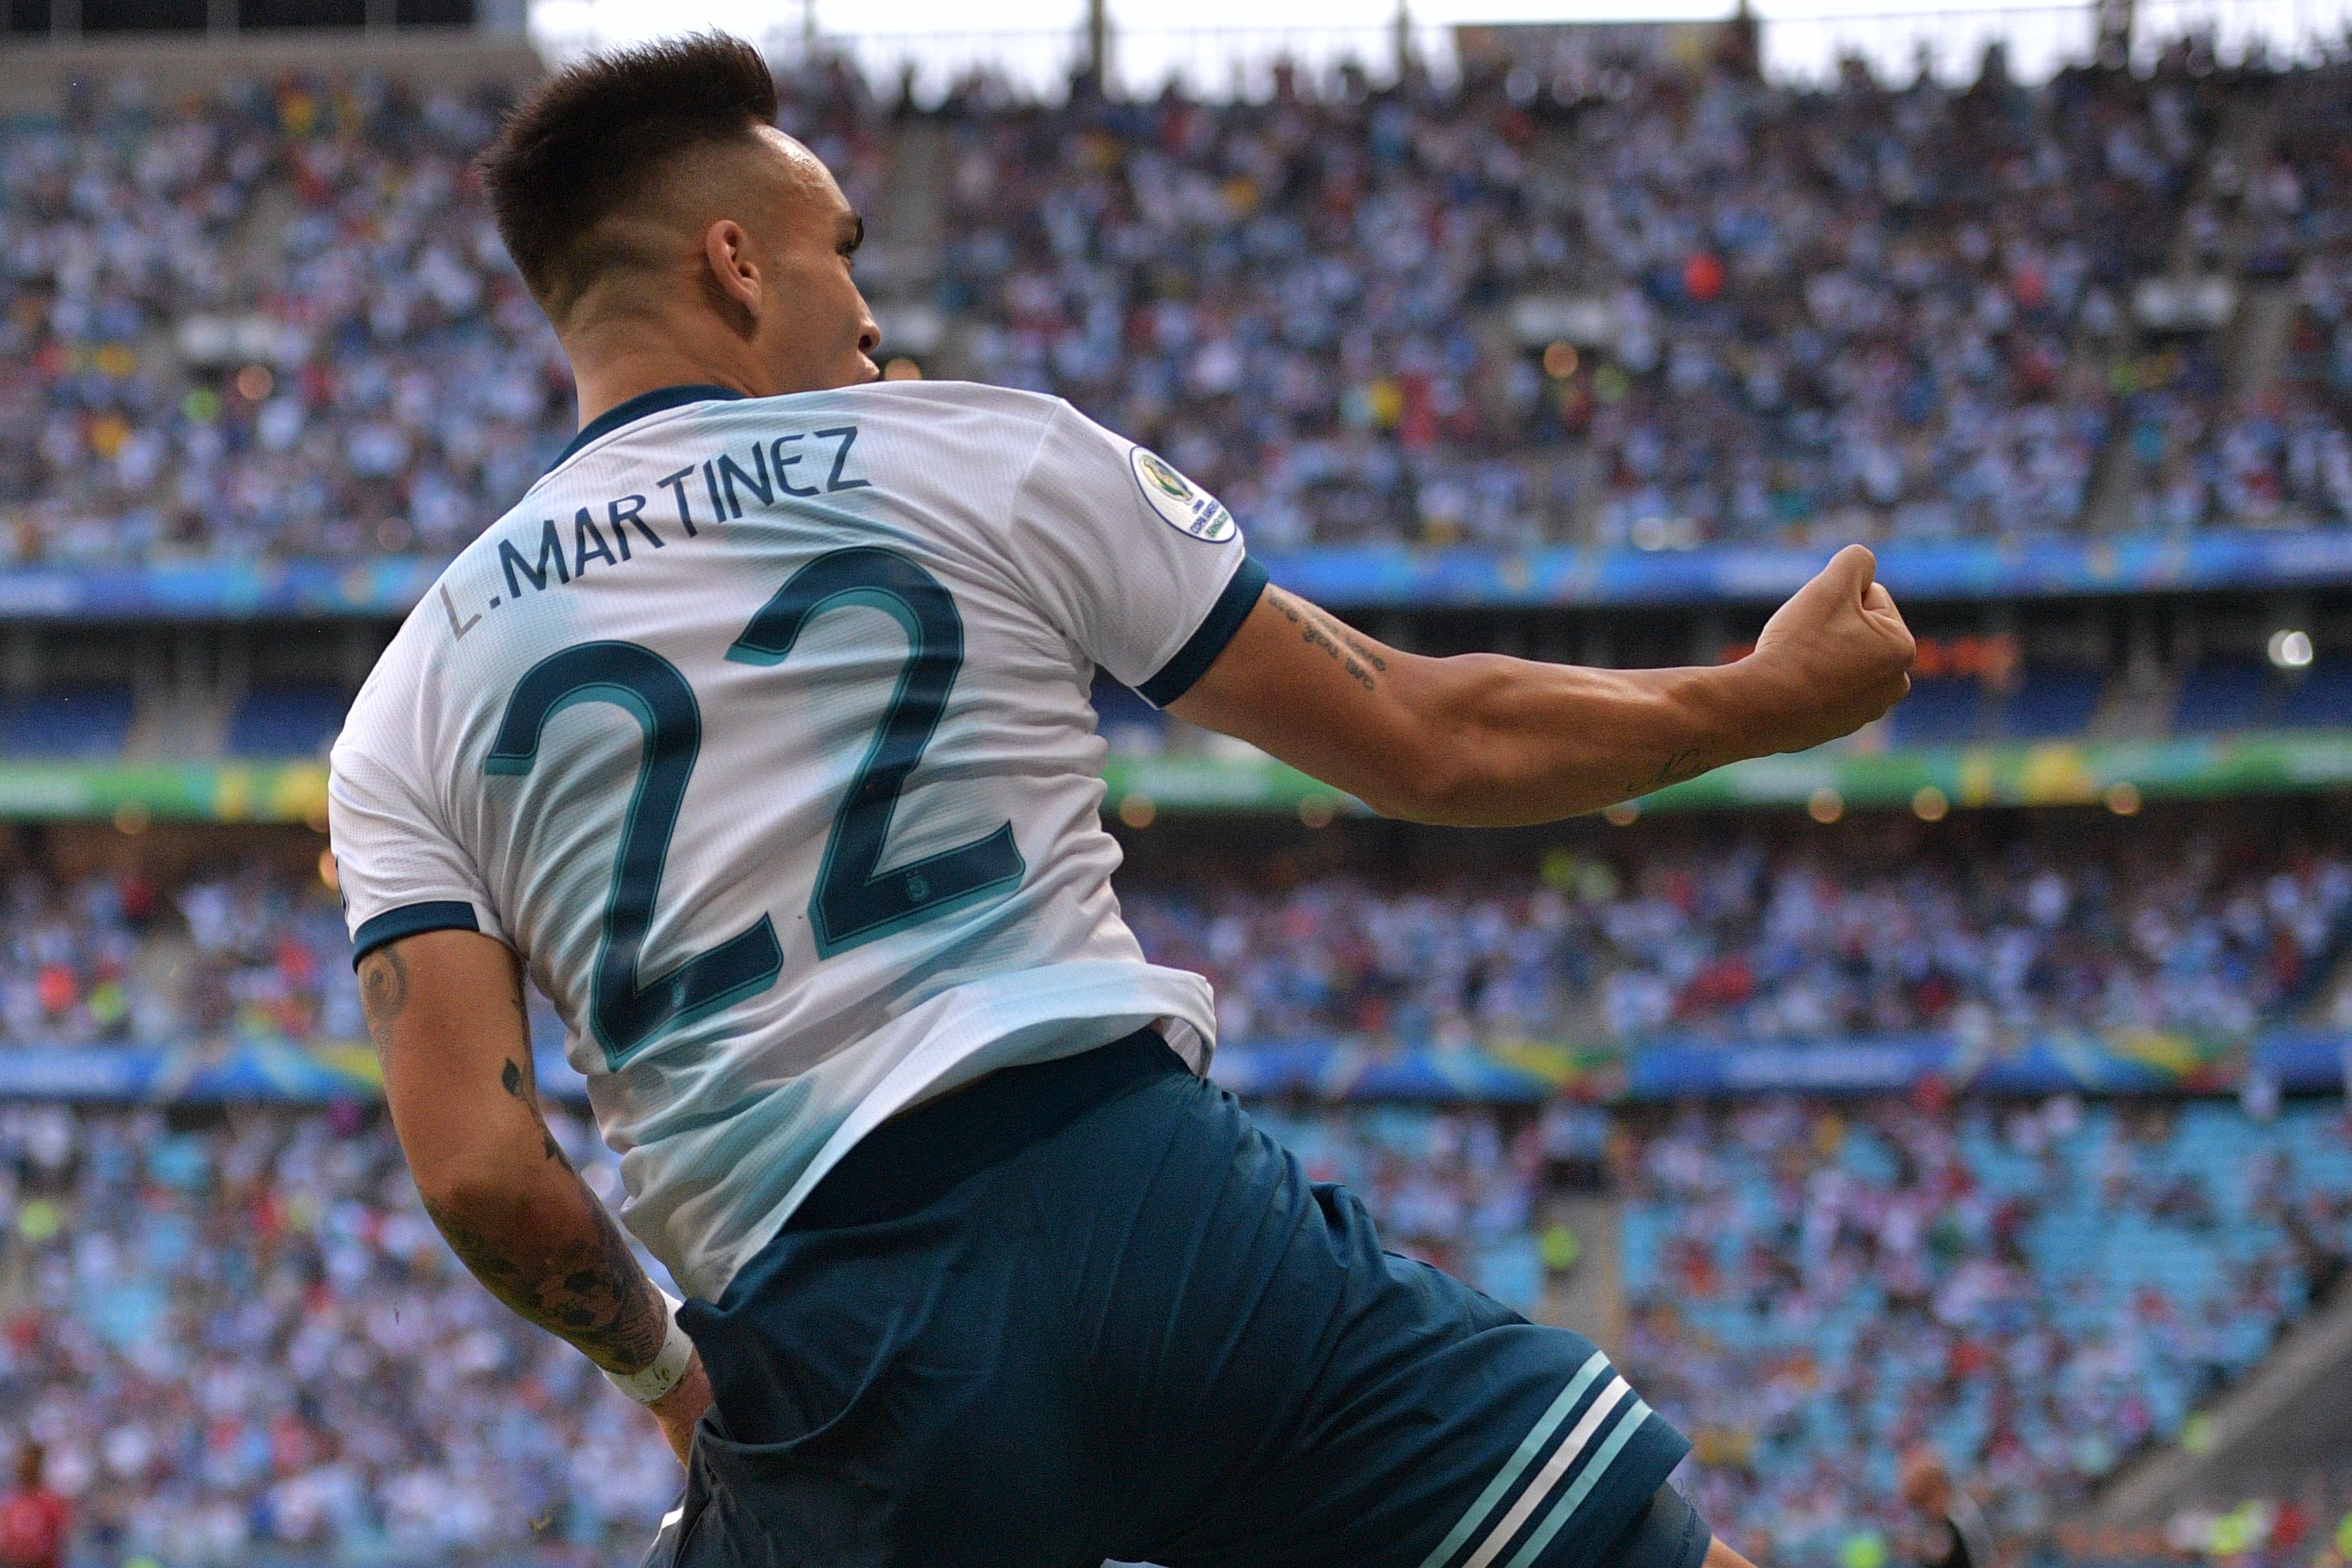 Will Lautaro Martinez celebrate a move to Chelsea? (Photo by Carl de Souza/AFP/Getty Images)